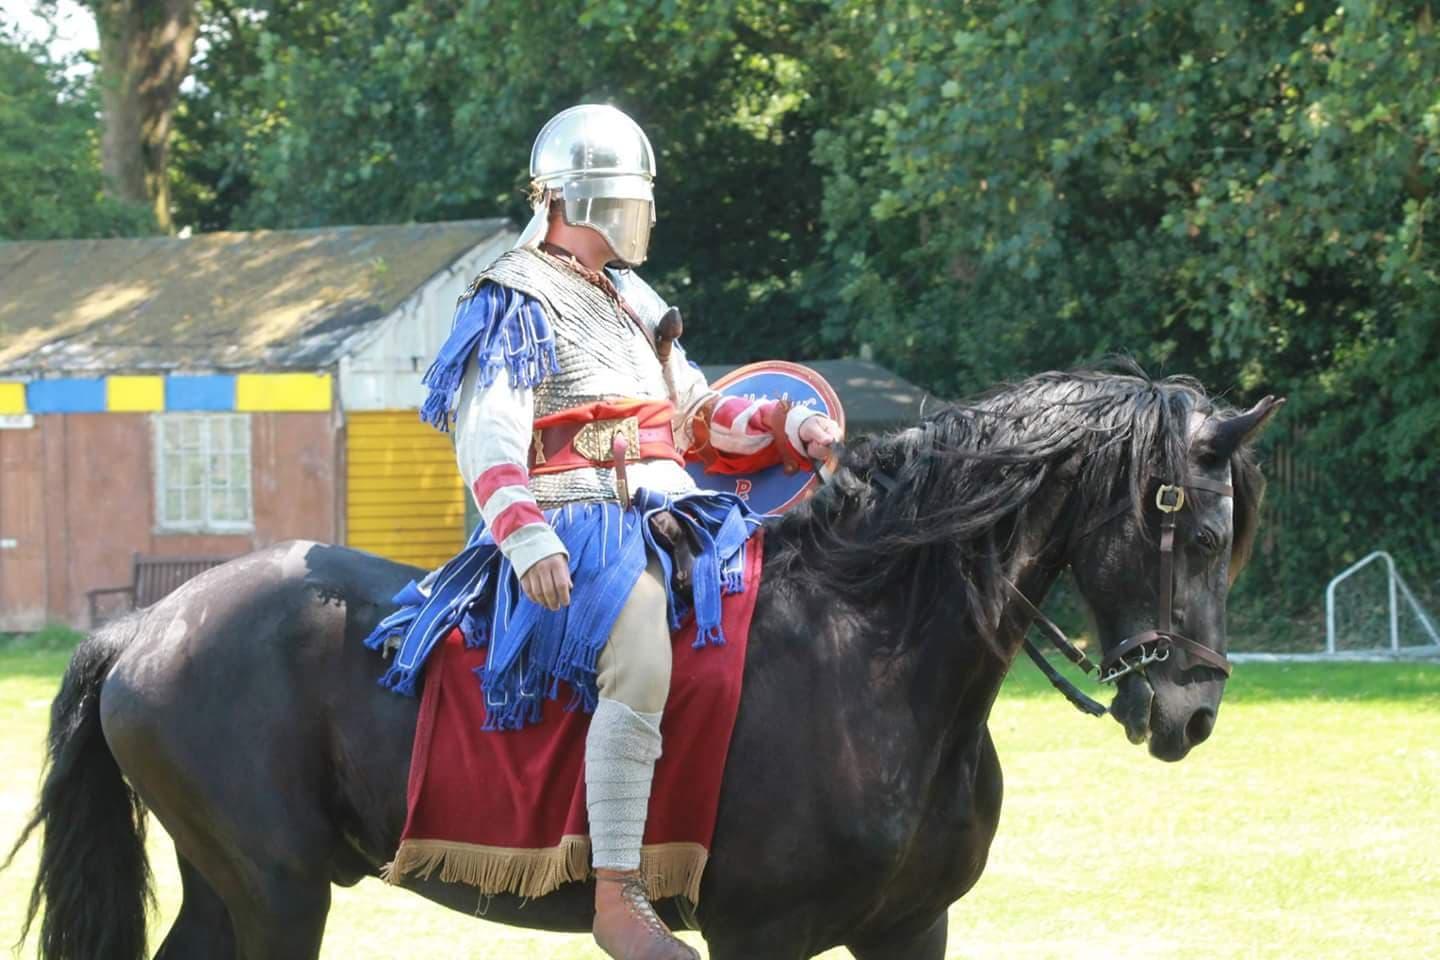 Roman cavalry officer mounted